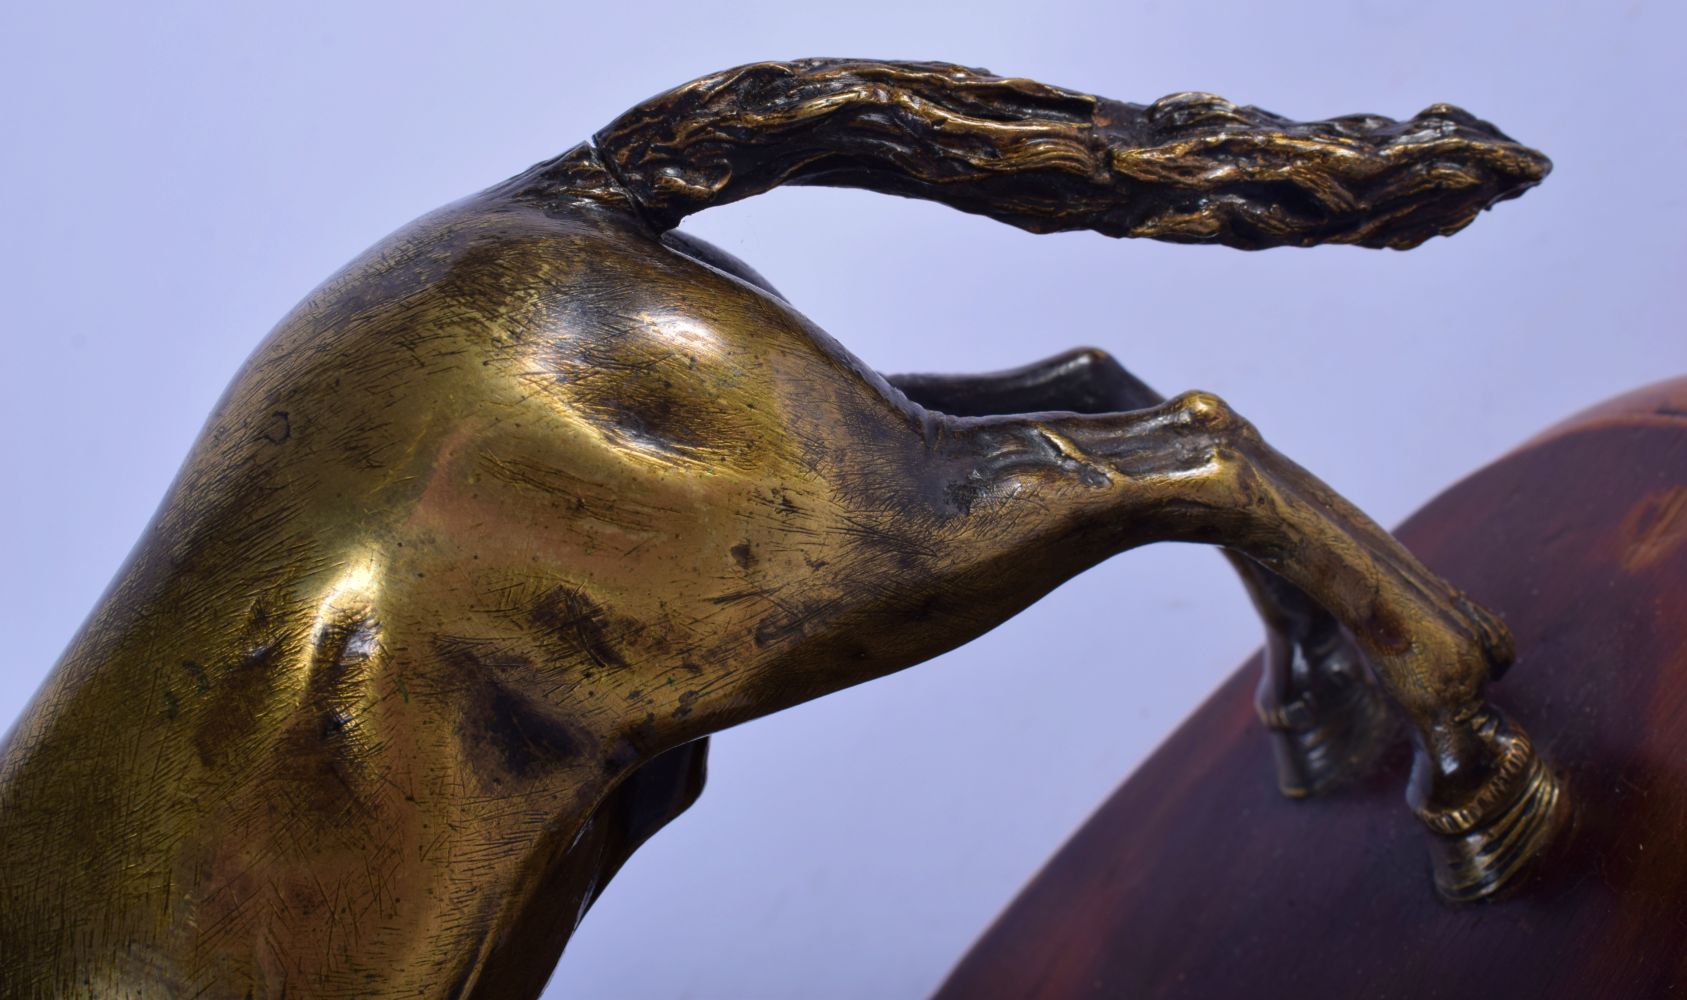 A FINE 18TH CENTURY EUROPEAN BRONZE FIGURE OF A ROAMING HORSE After the Antiquity, modelled leaping - Image 7 of 8